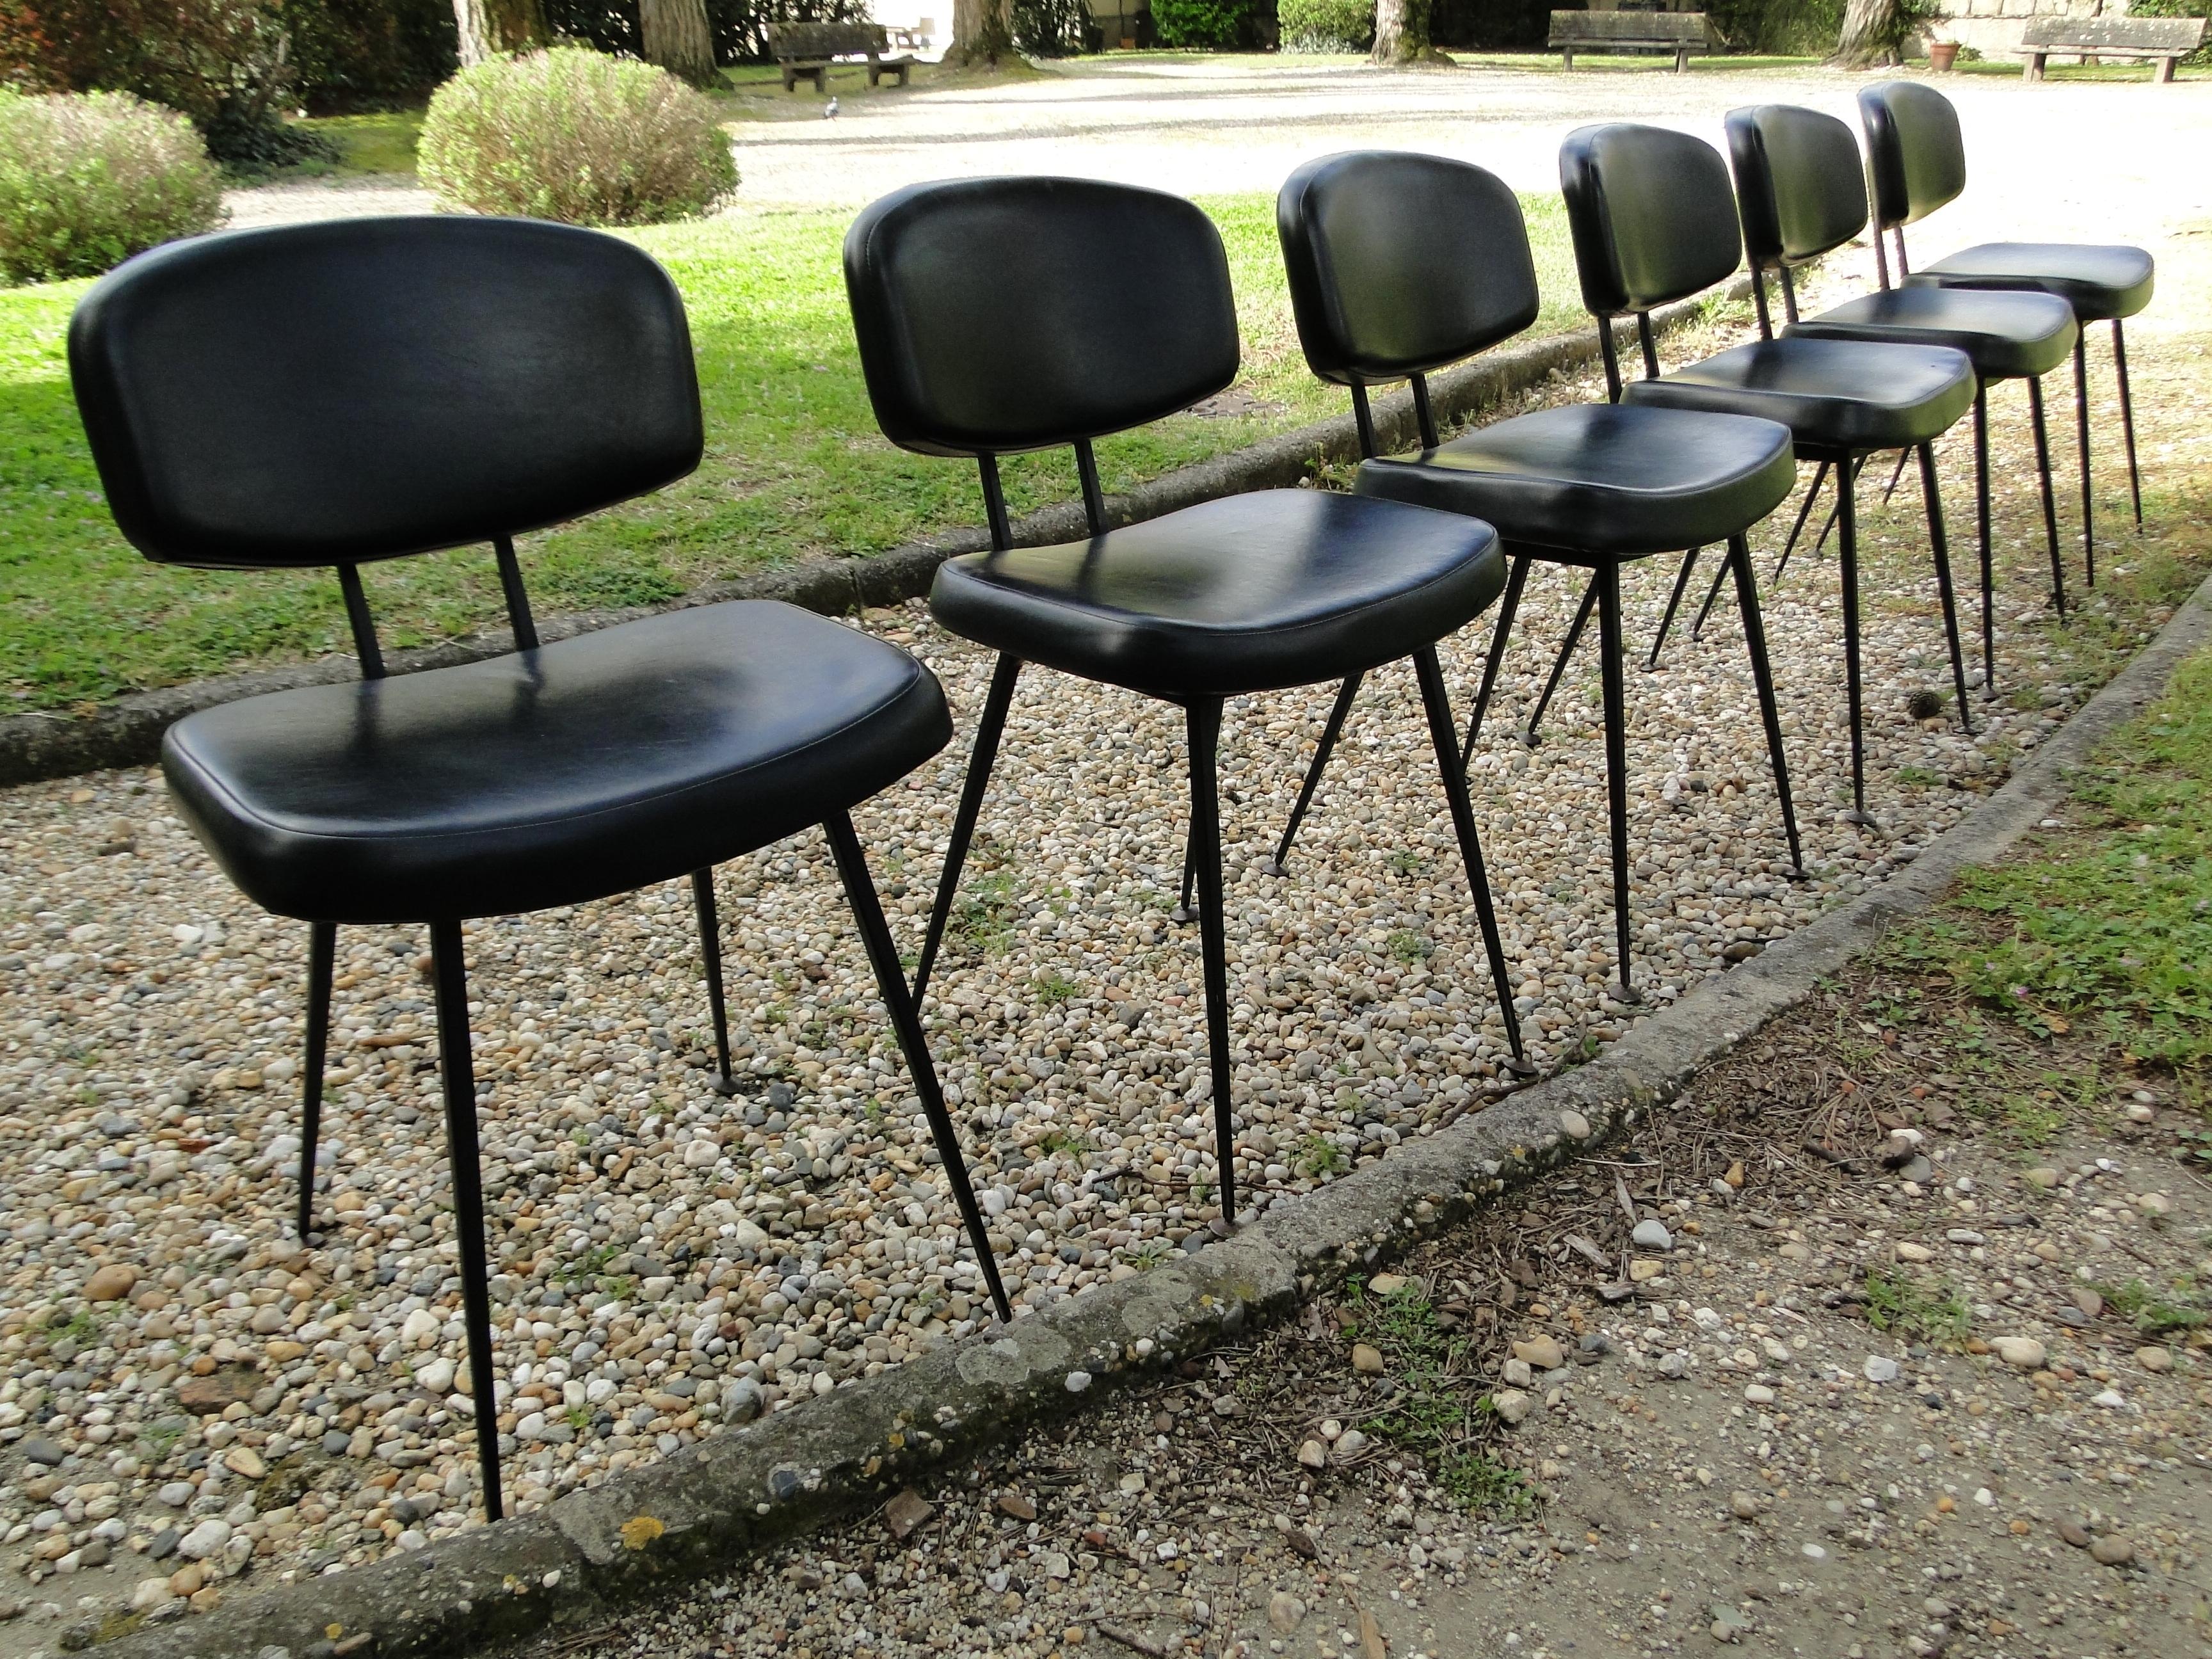 Set of 6 airborne chairs, produced in the 1960s. Composed of a black metal structure and foam covered in black Faux leather.

